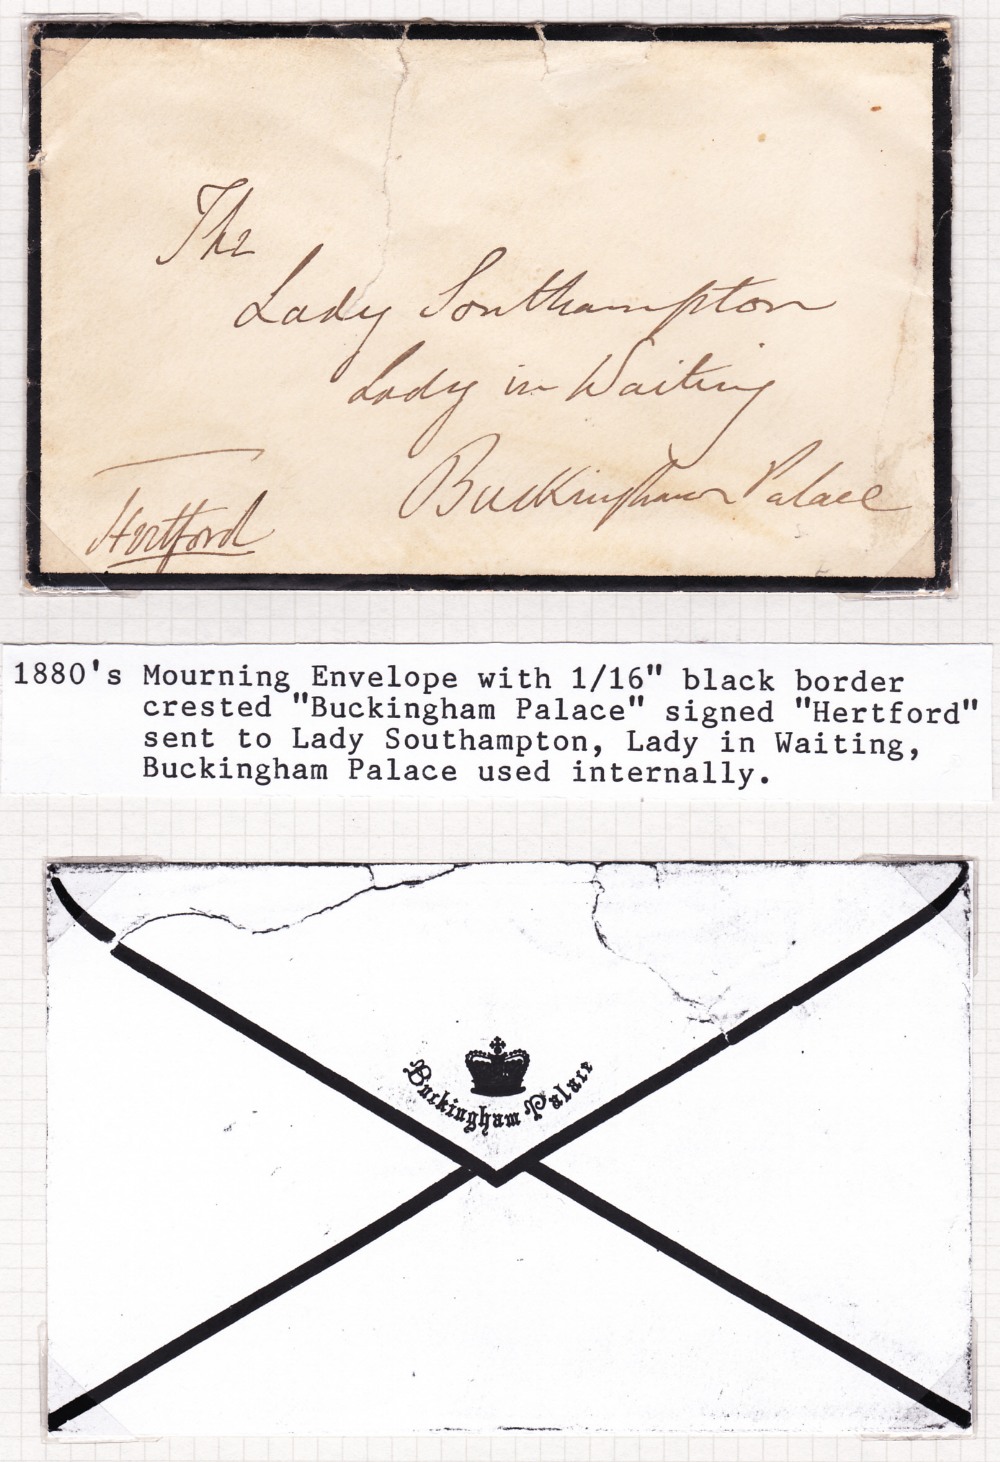 POSTAL HISTORY : Buckingham Palace mourning envelope from the 1880's, addressed to Lady Southampton,